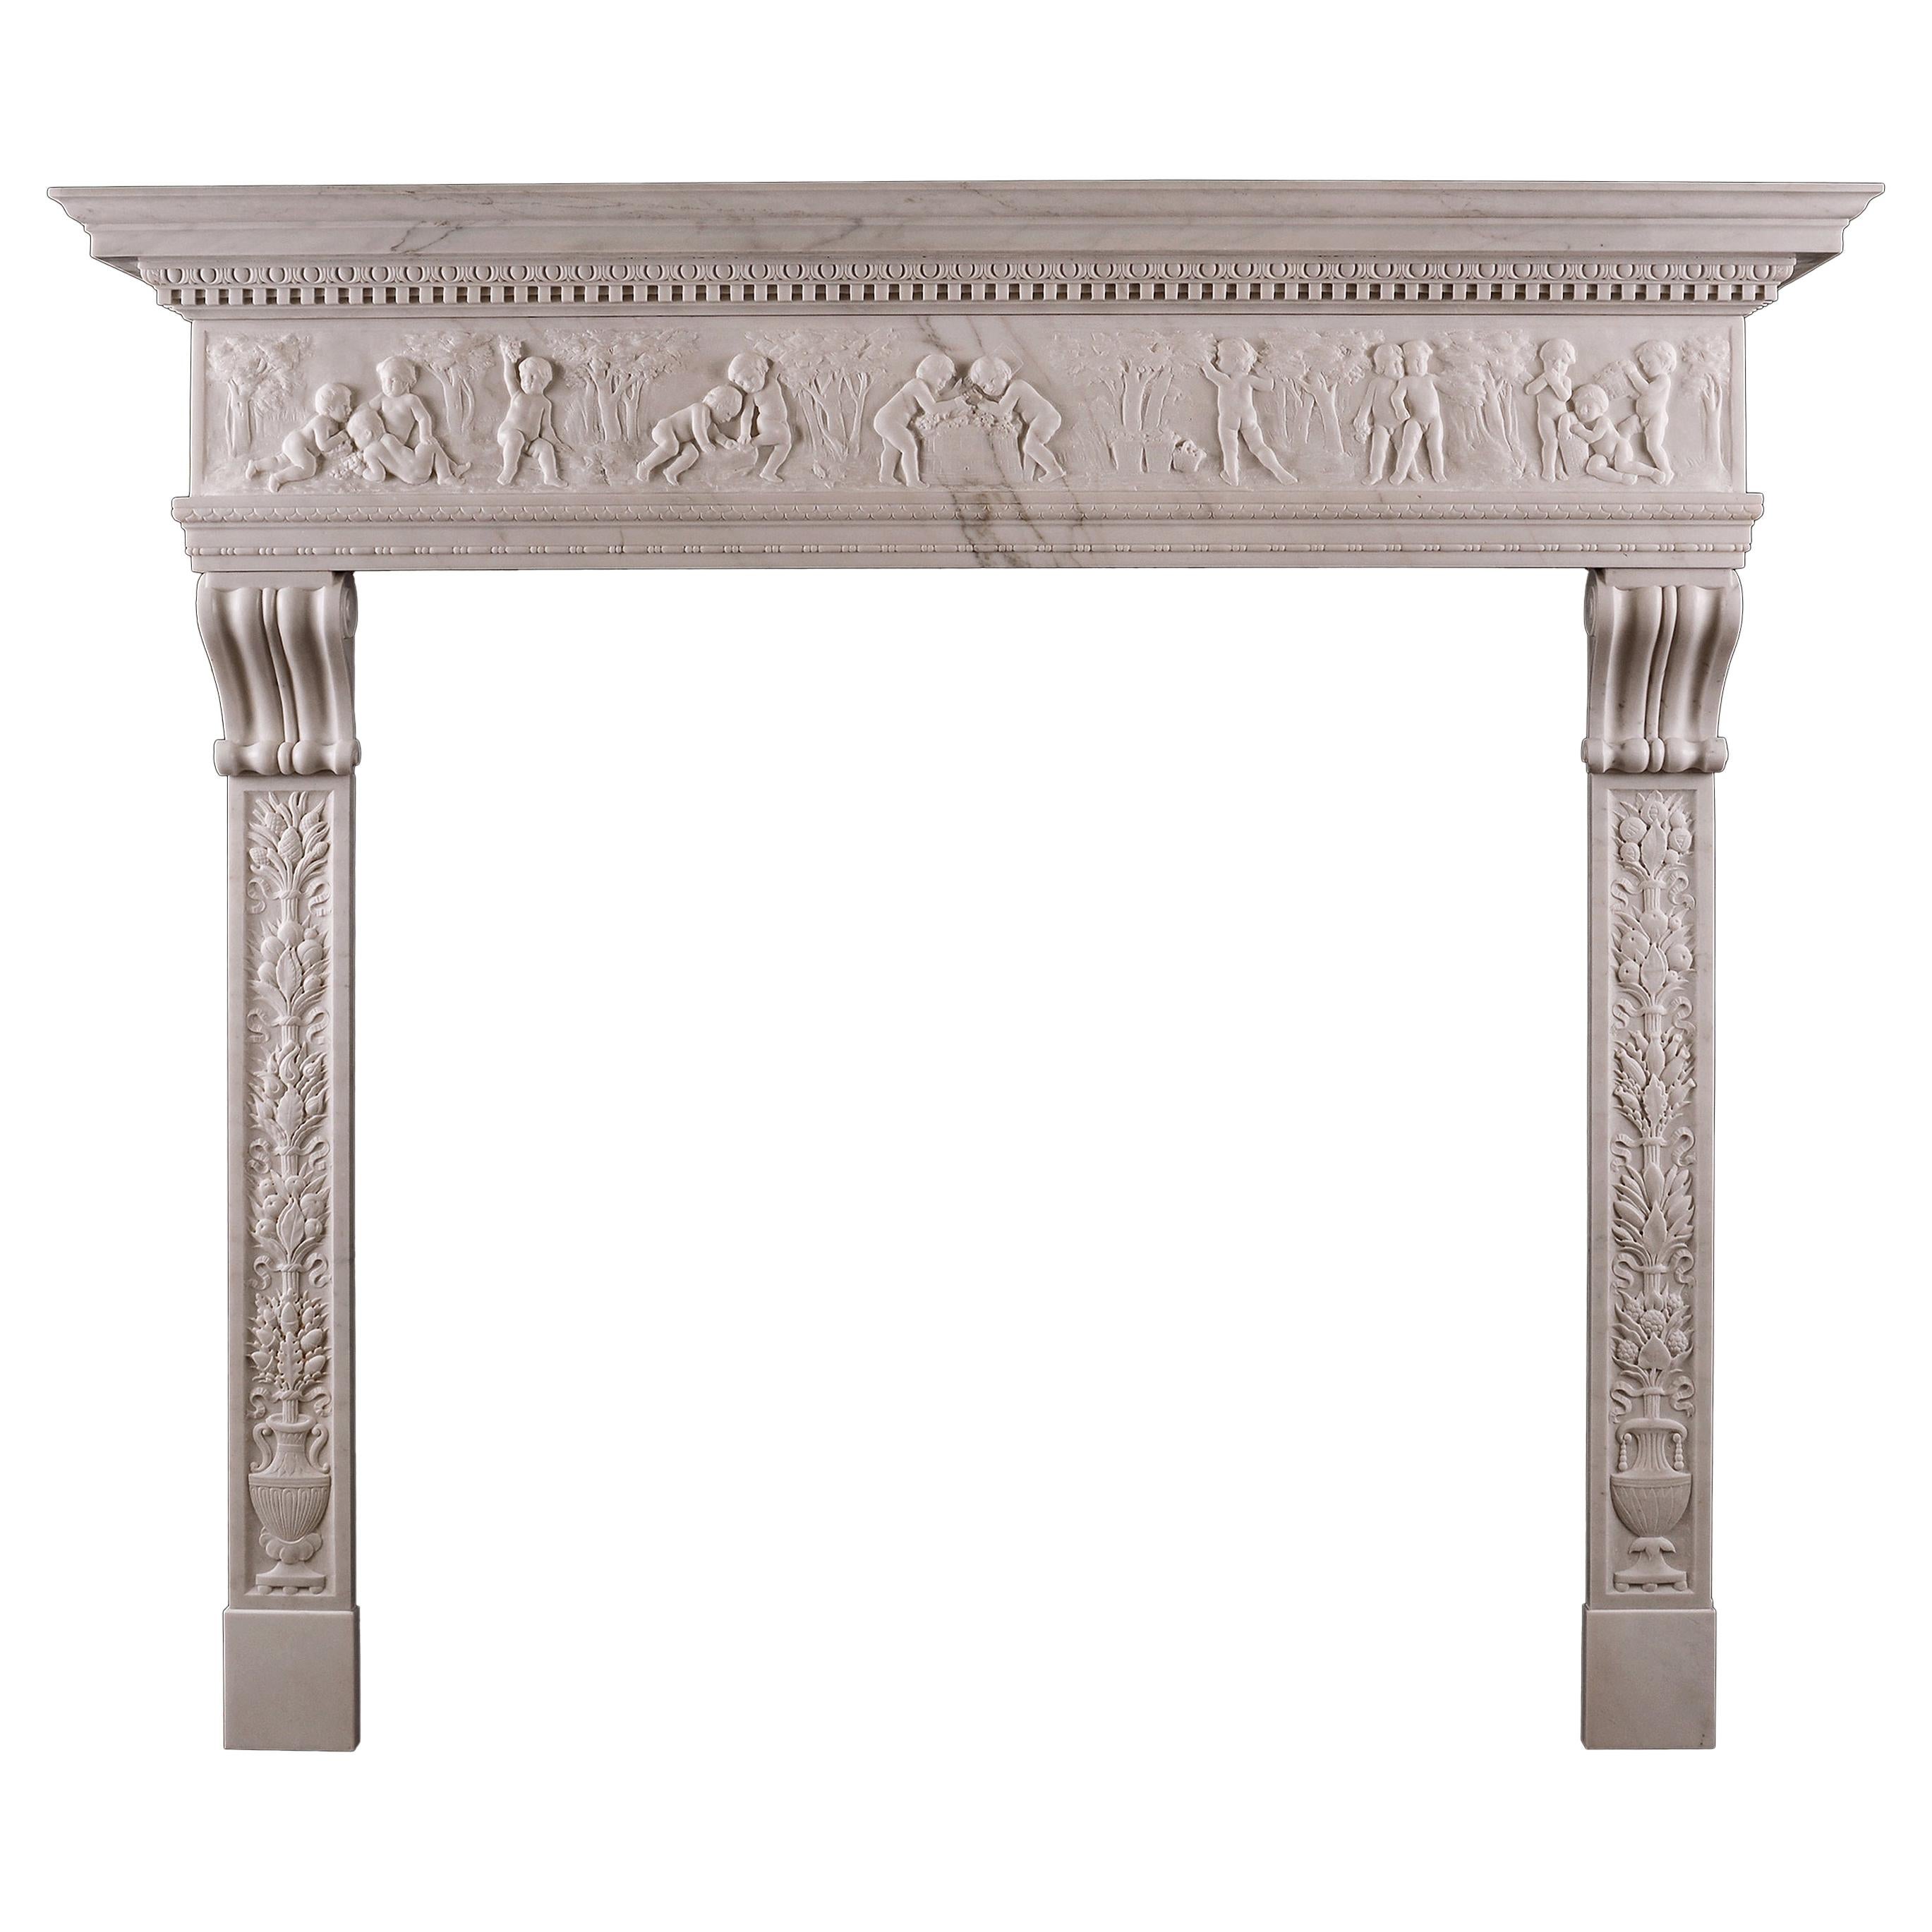 Very Fine Statuary White Marble Fireplace in the Italian Renaissance Manner For Sale